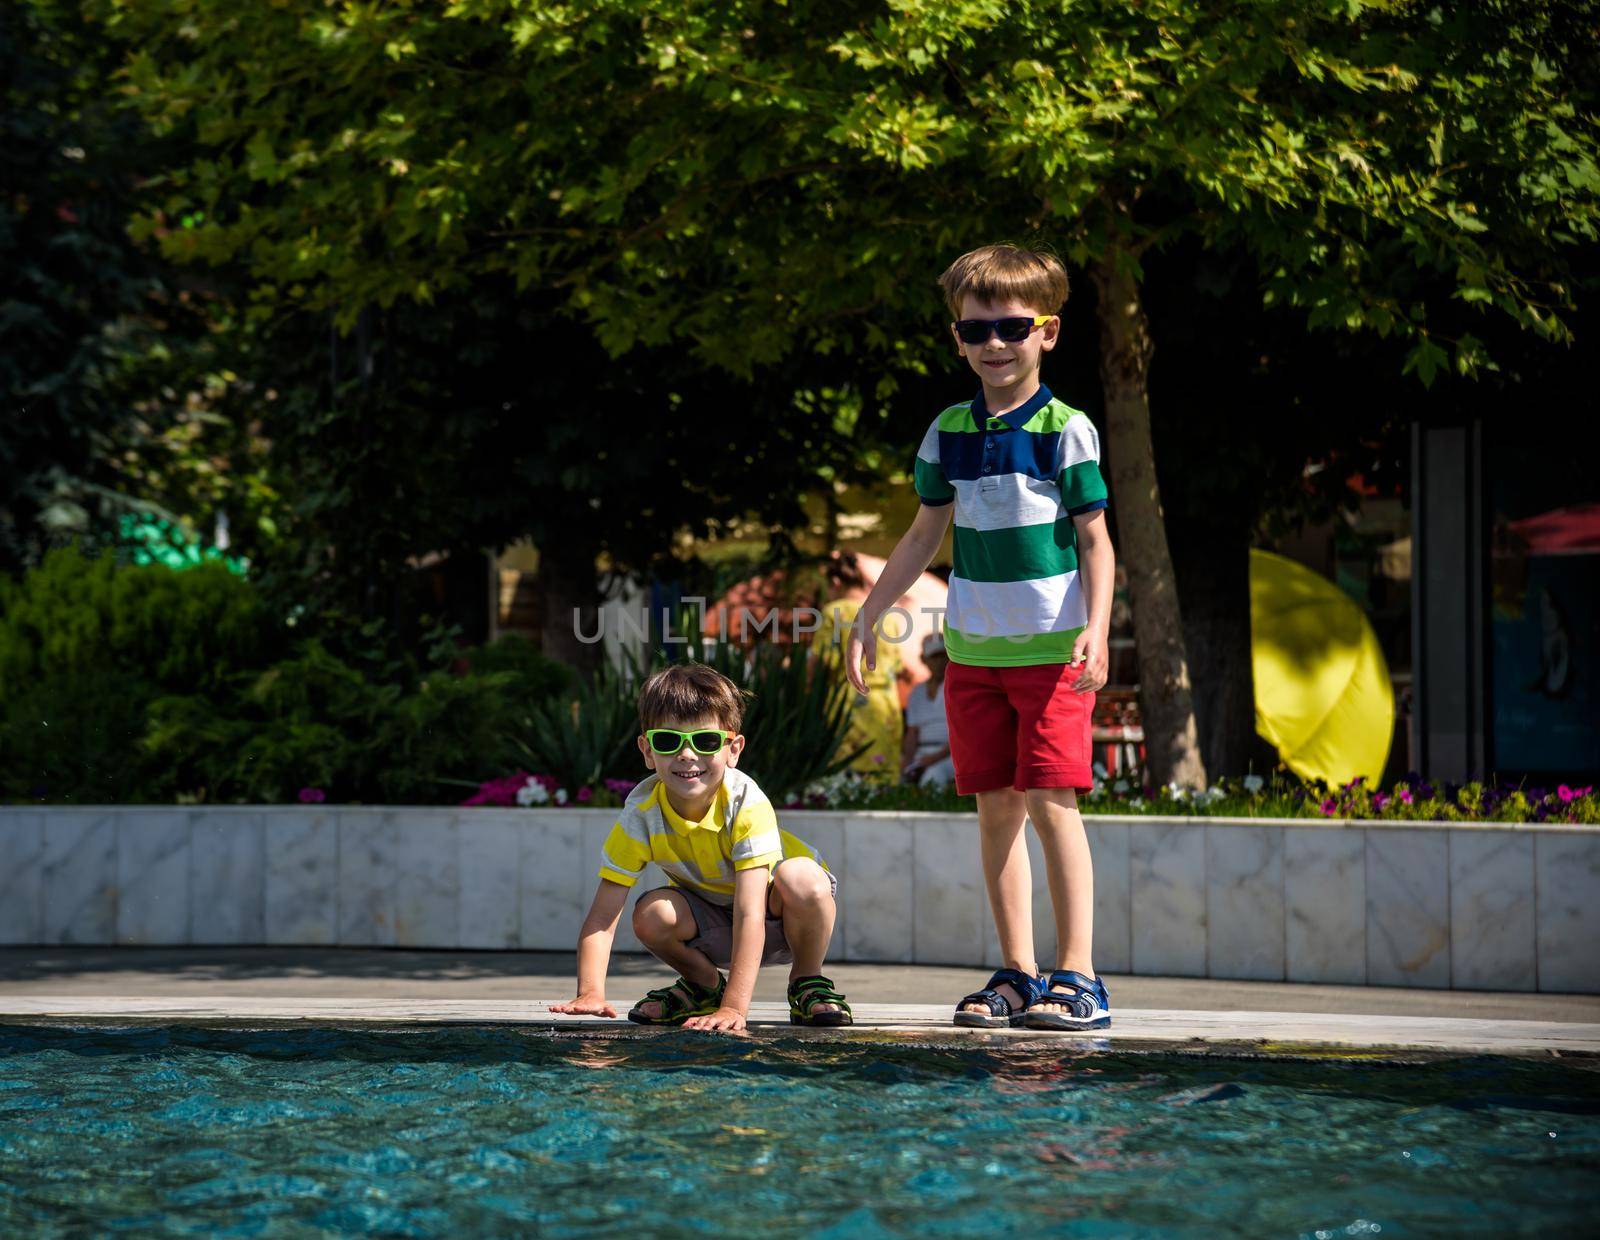 Group of happy children playing outdoors near pool or fountain. Kids having fun in park during summer vacation. Dressed in colorful t-shirts and shorts with sunglasses. Summer holiday concept by Kobysh